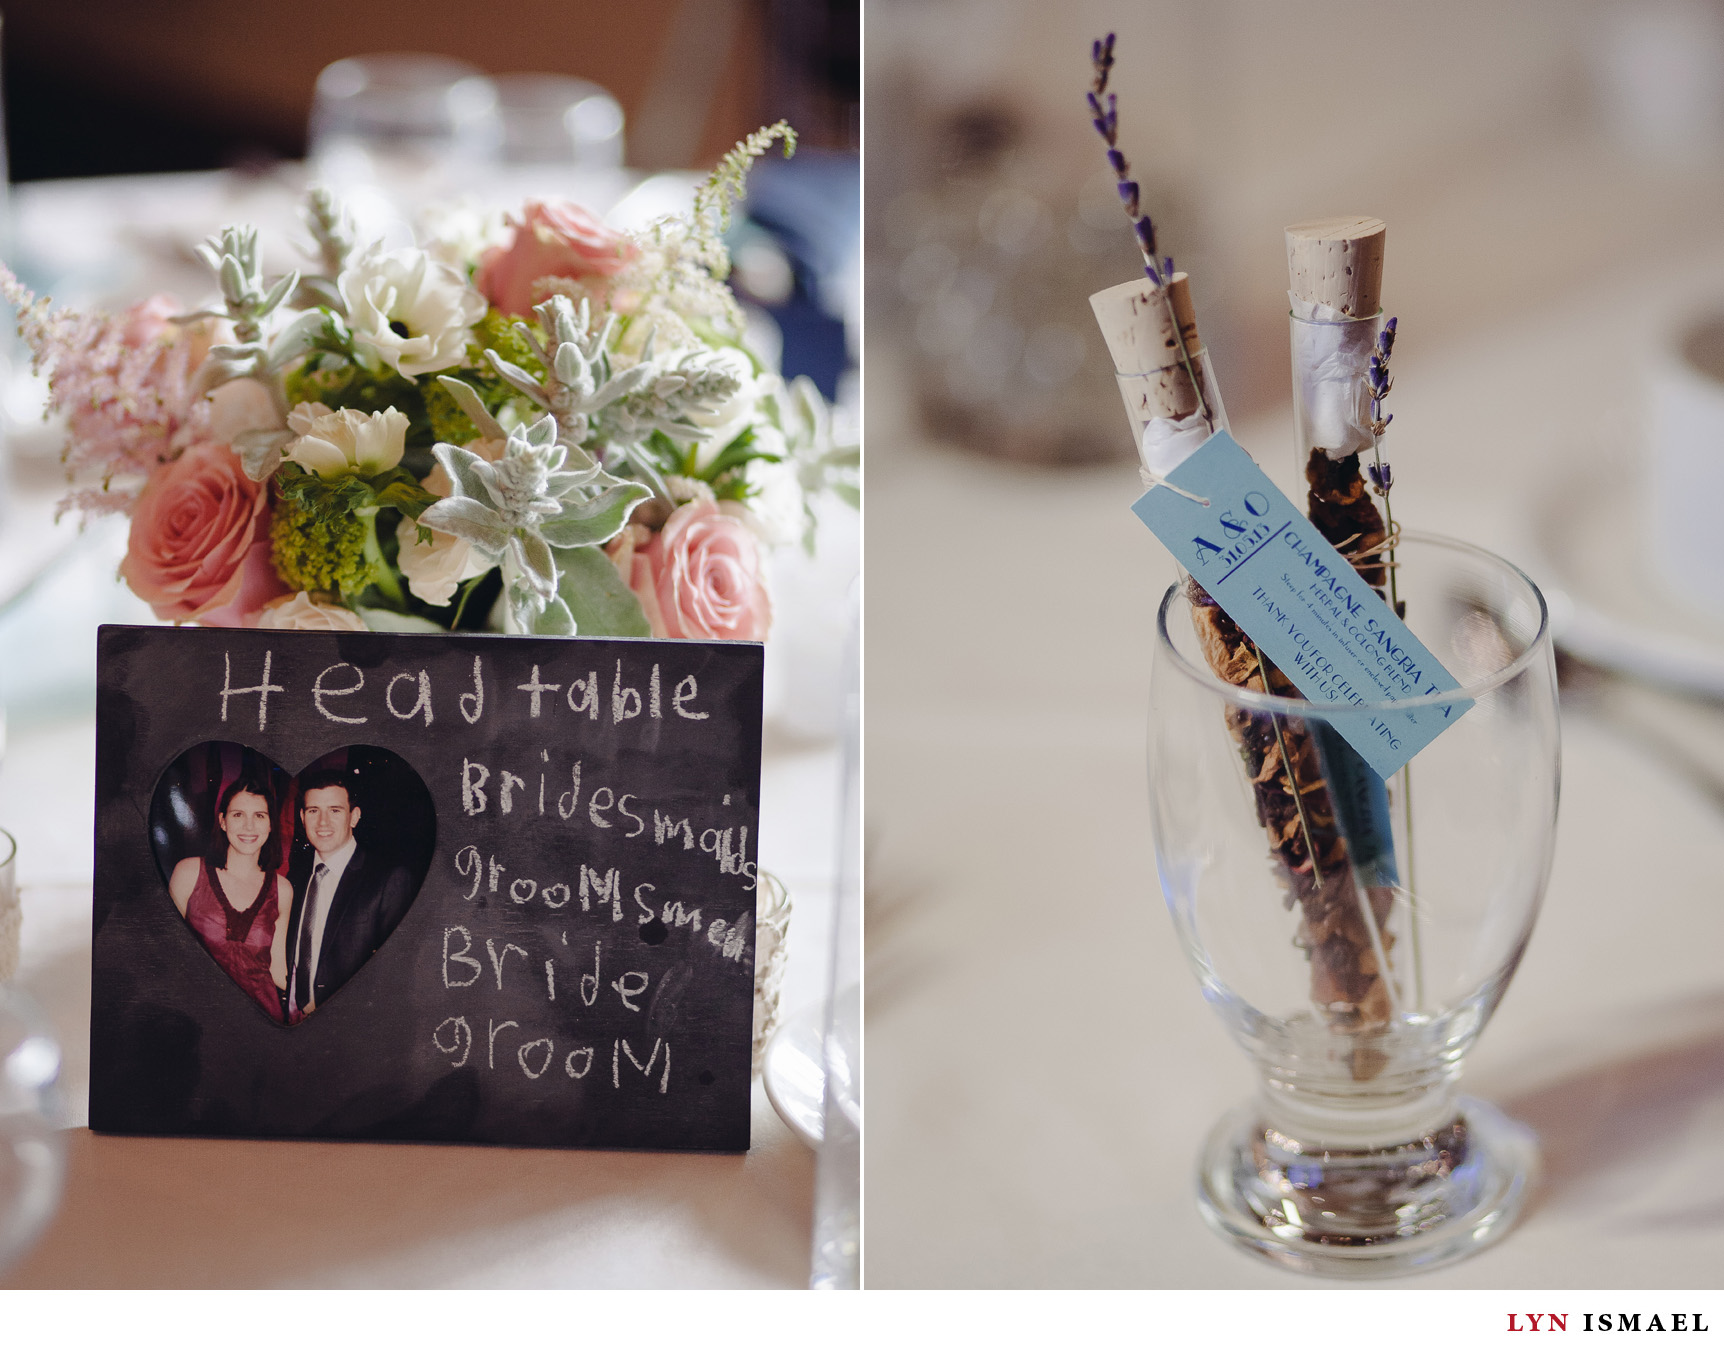 Wedding centerpieces and test tubes filled with teas at a Windermere Manor wedding